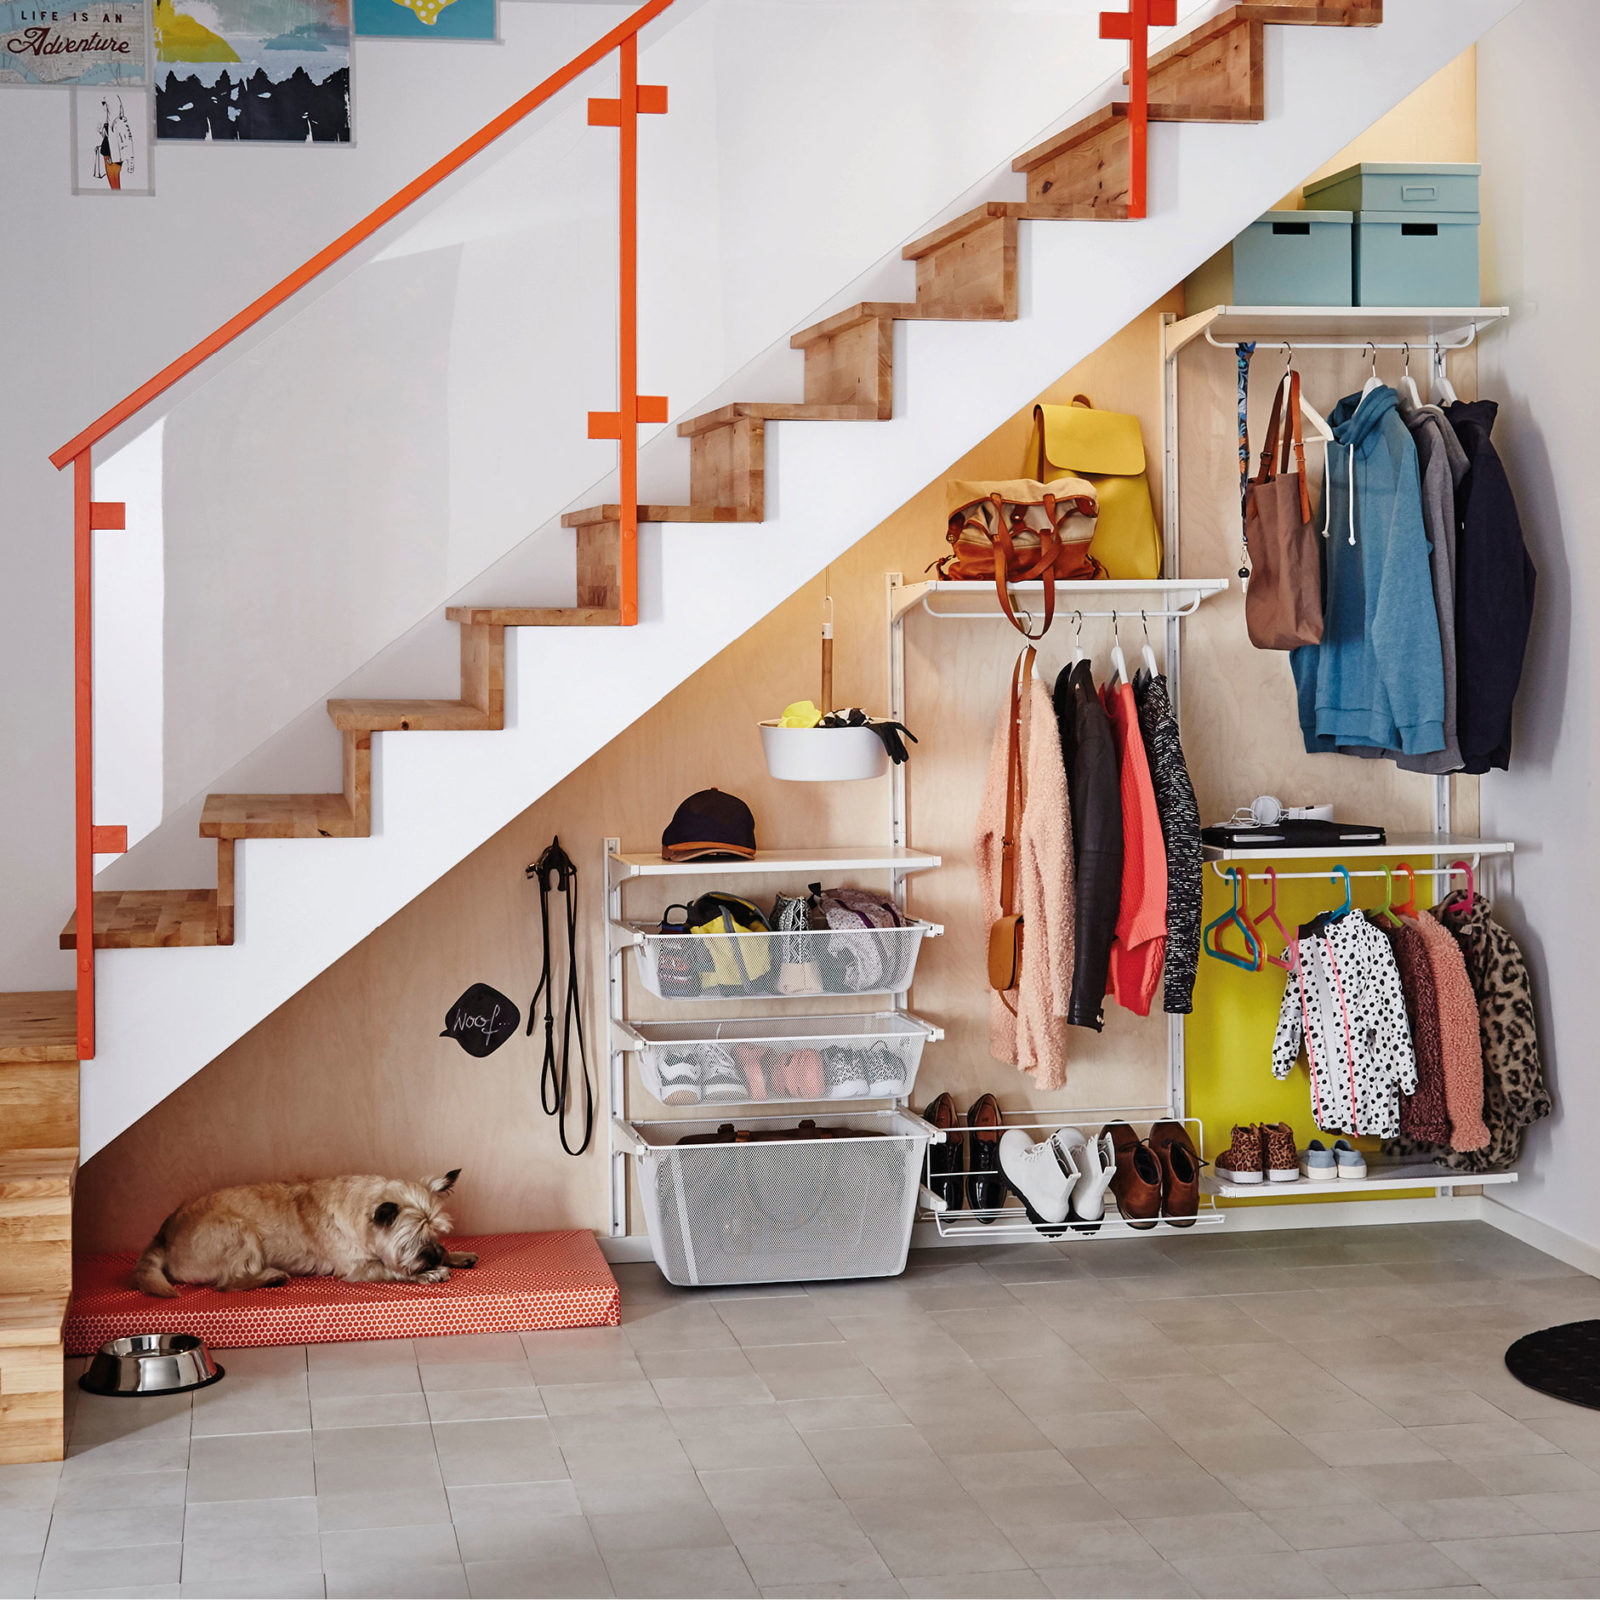 Hallway with storage containers, shelves, shoes and clothes racks under staircase. Small dog on dog bed in a corner.